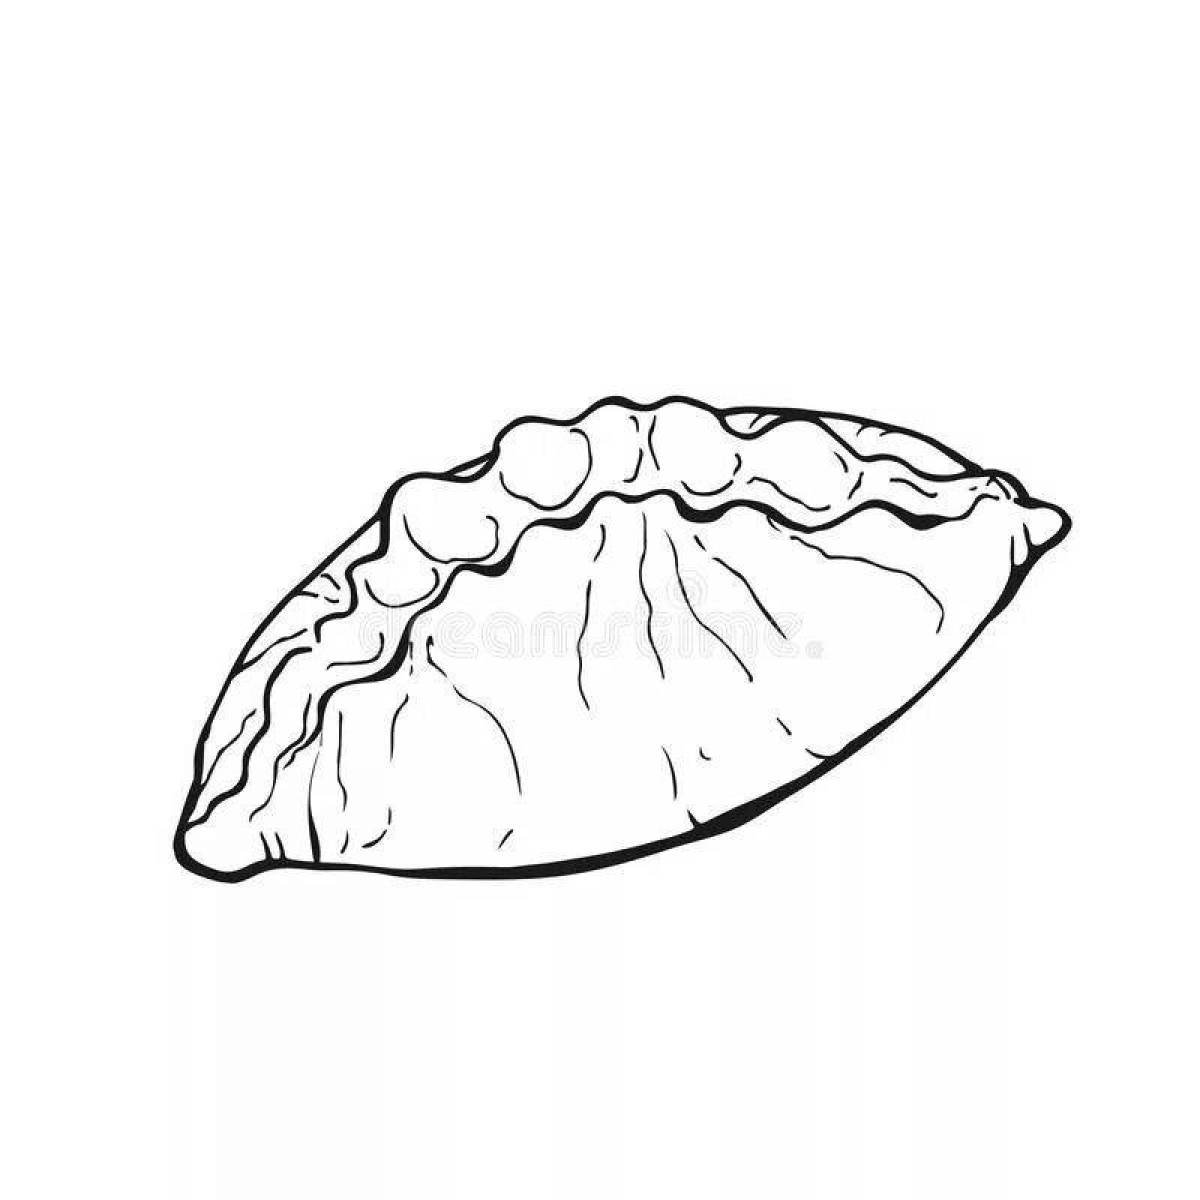 Coloring page inviting pie